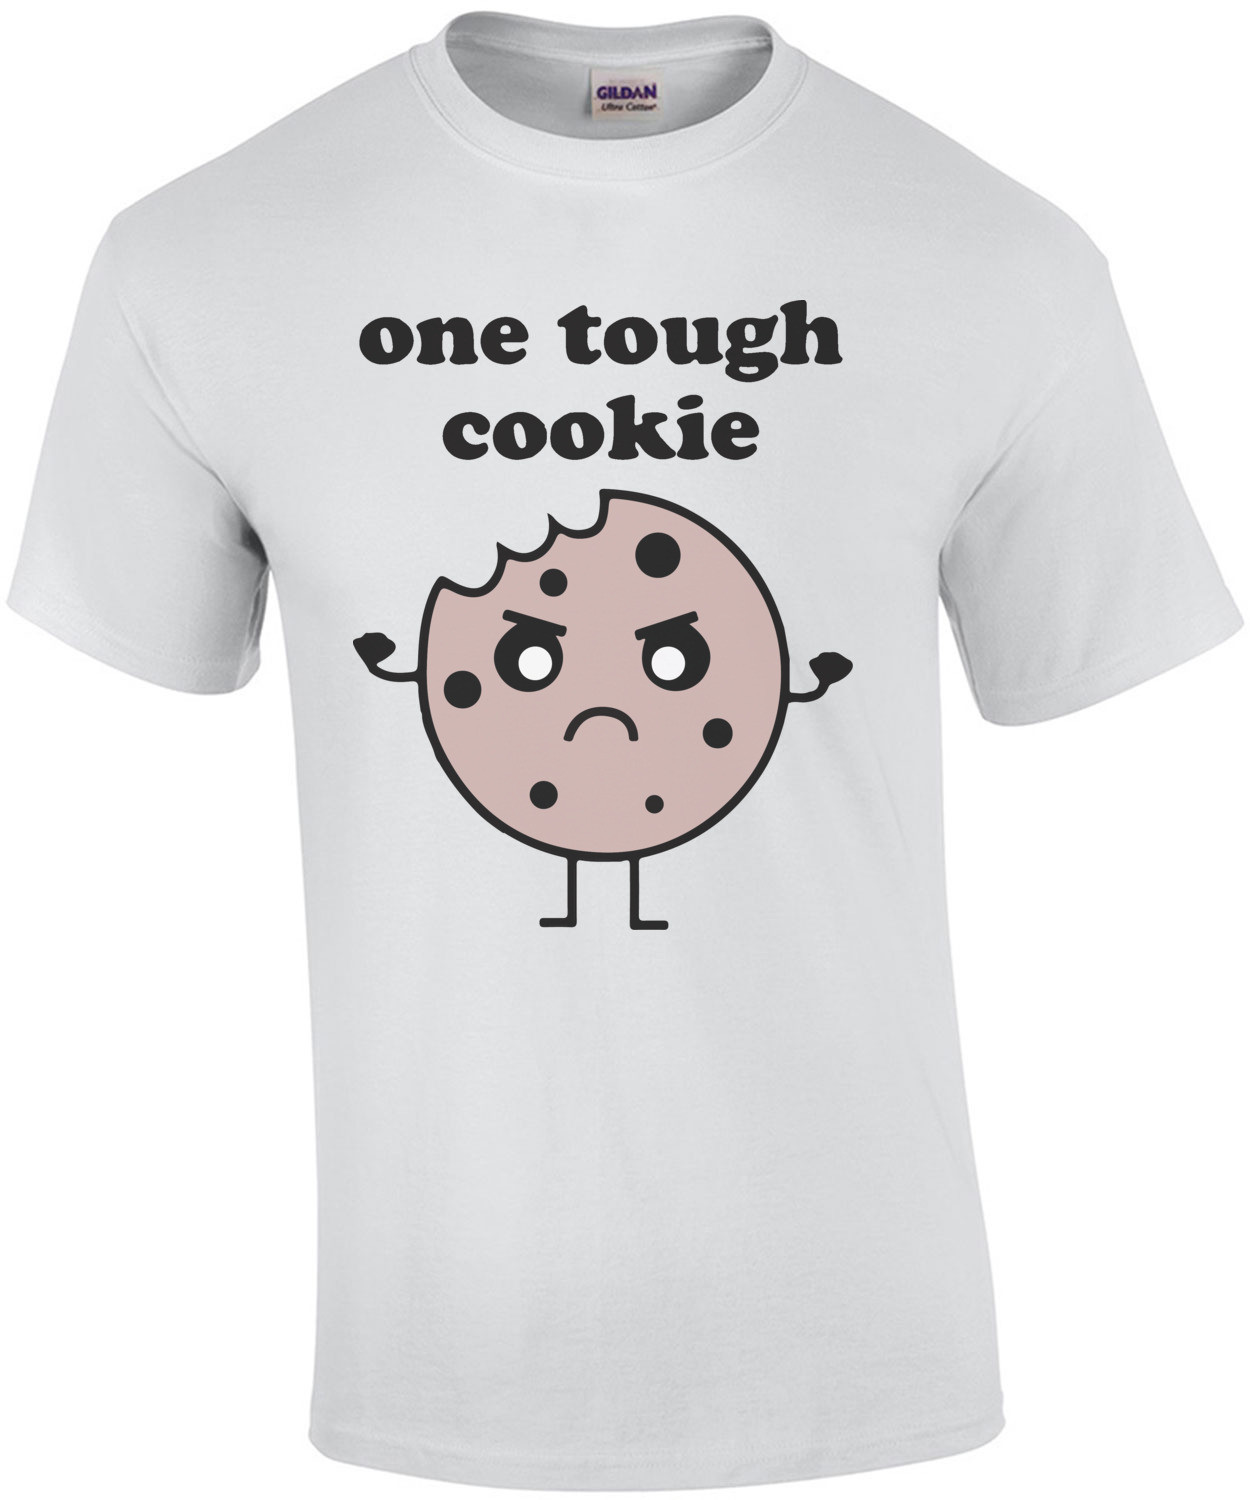 One Tough Cookie - Funny T-Shirt